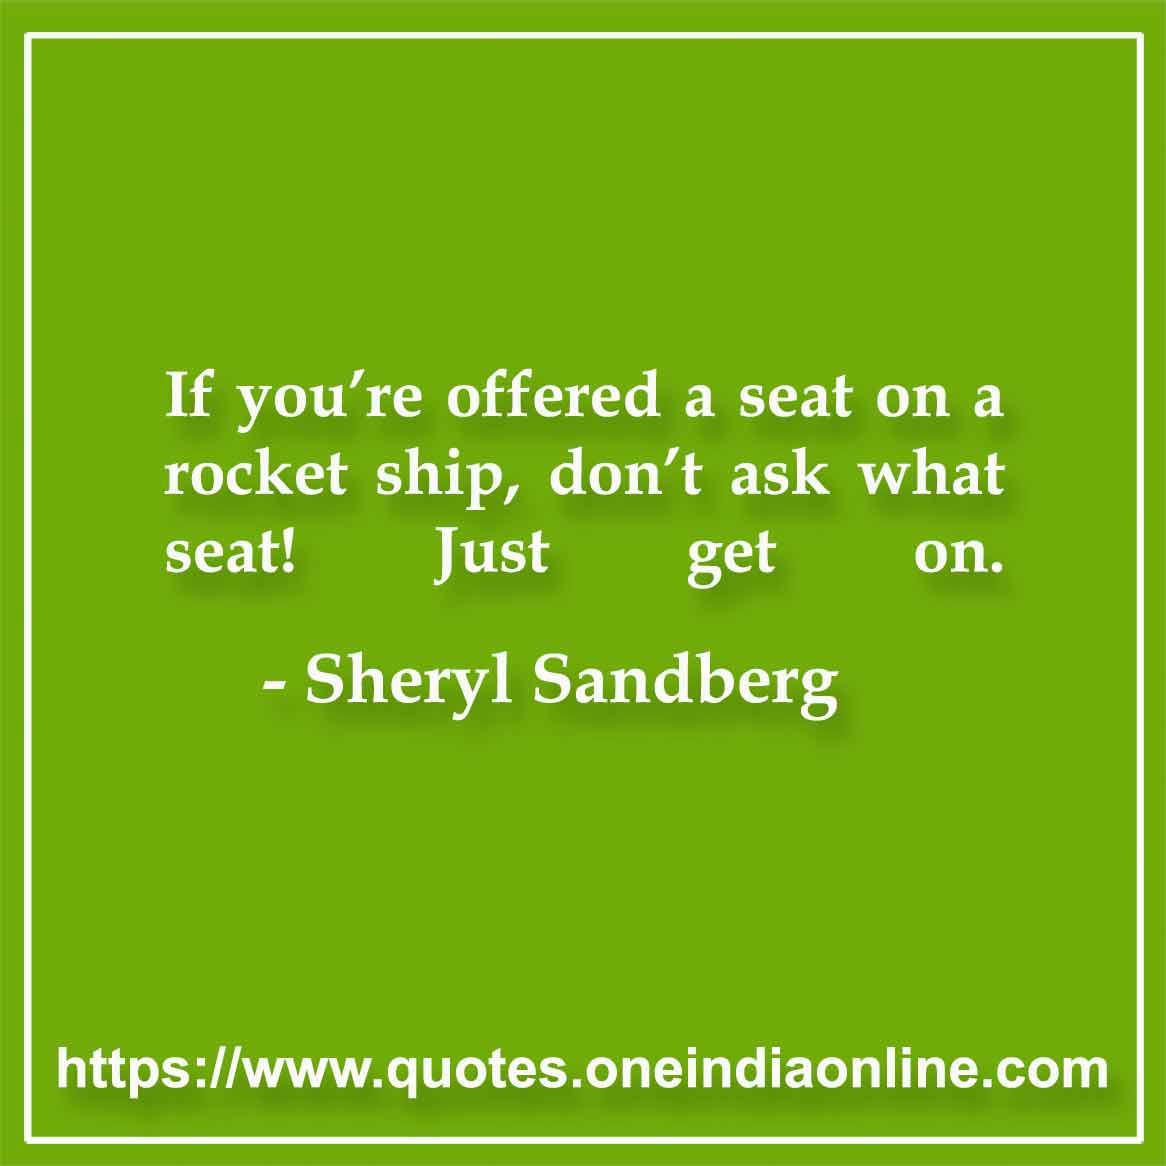 If you’re offered a seat on a rocket ship, don’t ask what seat! Just get on.

-  Sheryl Sandberg